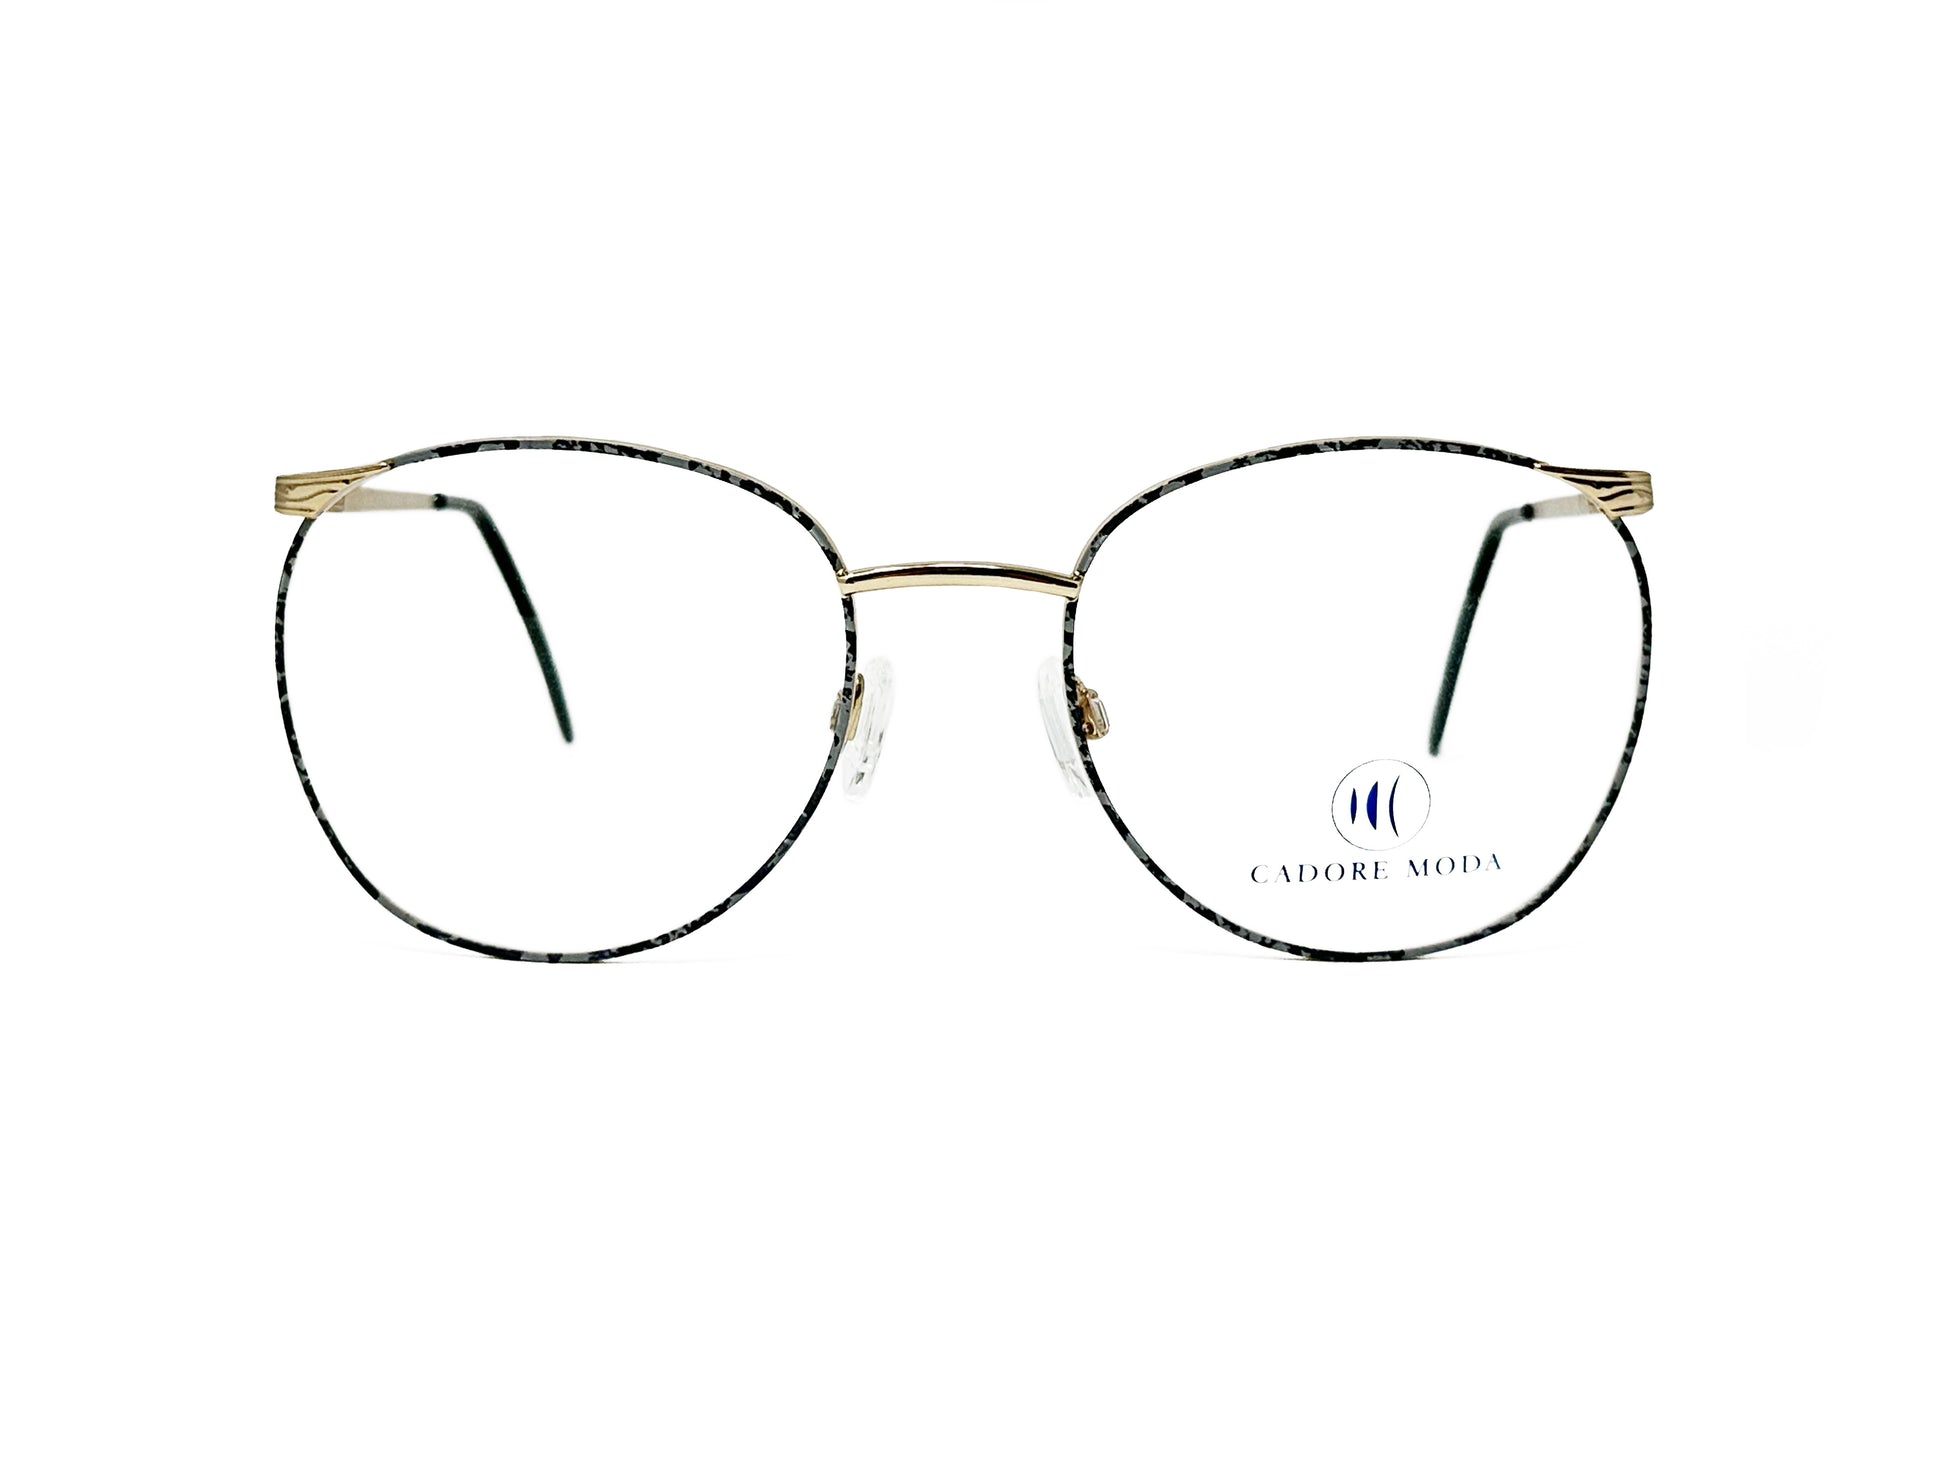 Cadore Moda squared-round, metal optical frame. Model: Boca. Color: Demi Gray, with gold metal. Front view. 